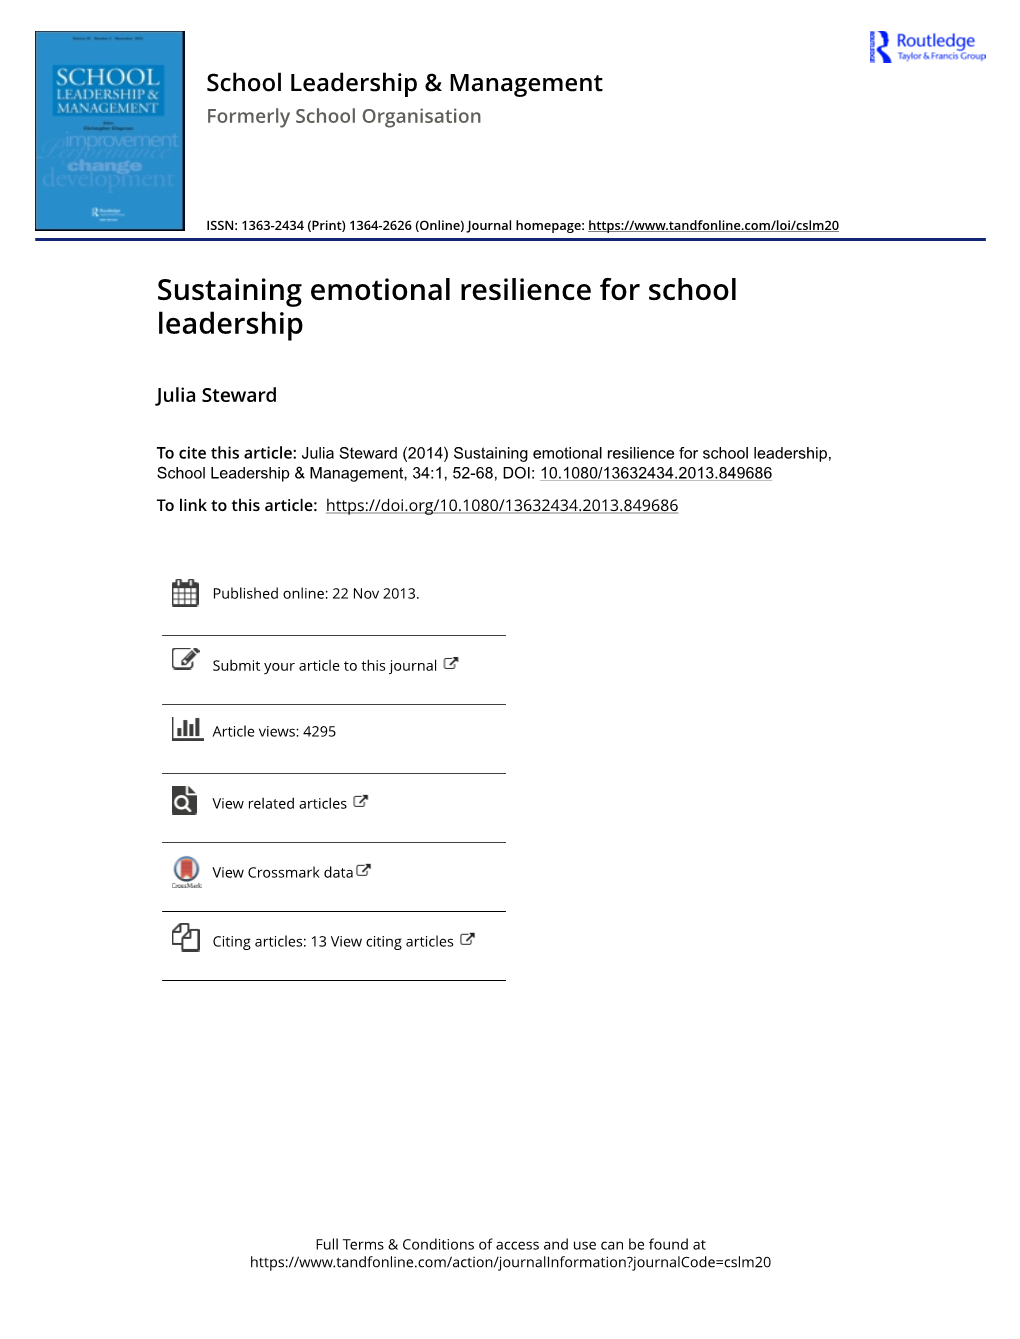 Sustaining Emotional Resilience for School Leadership